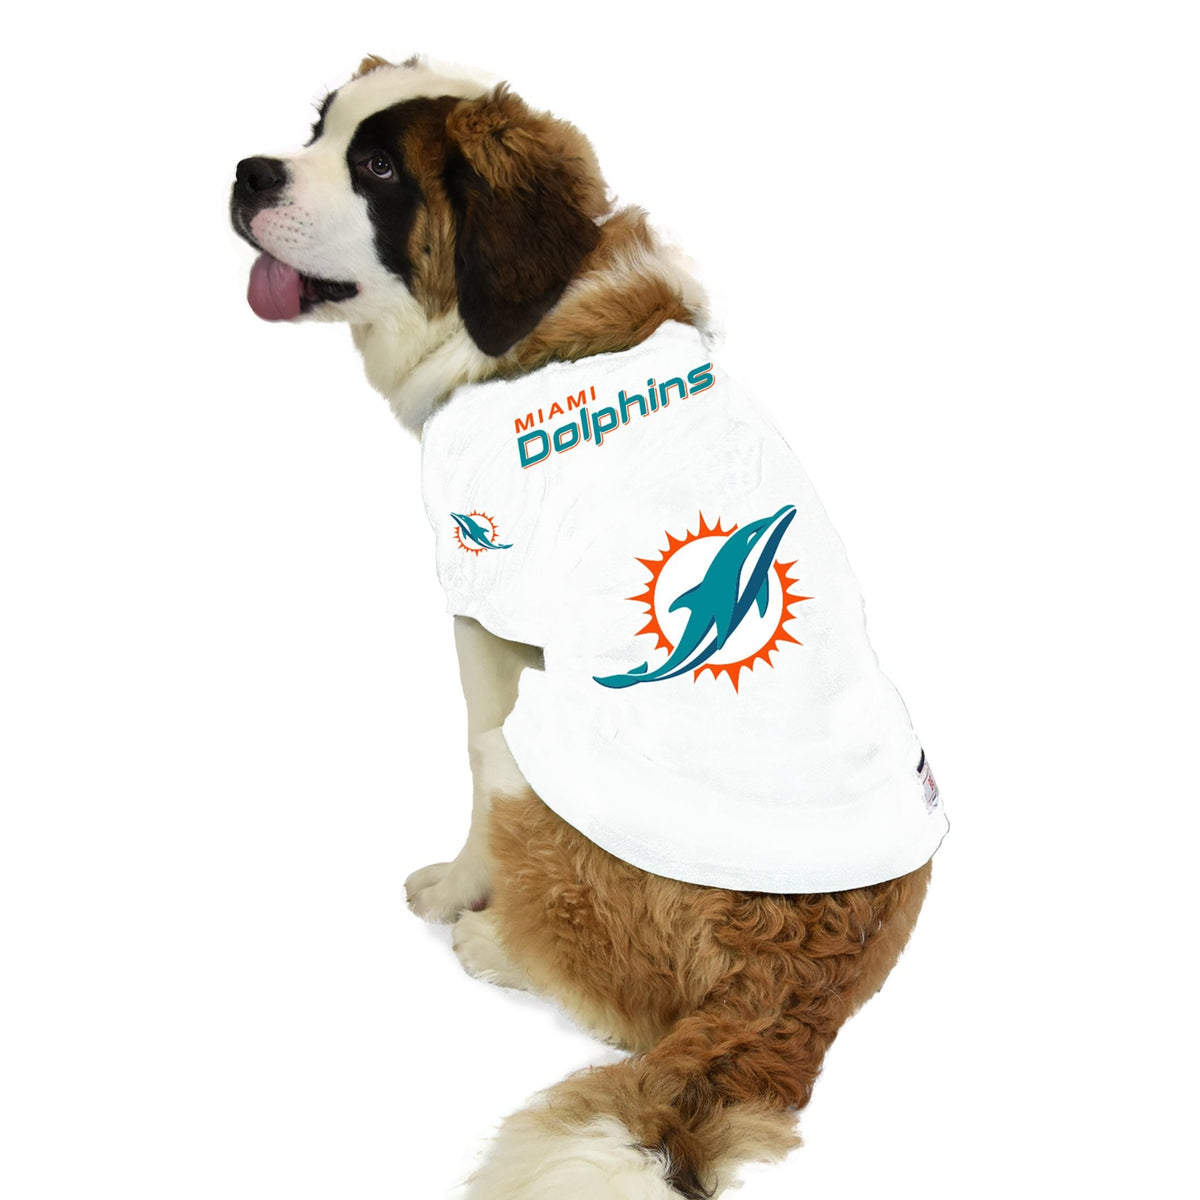 red dolphins jersey